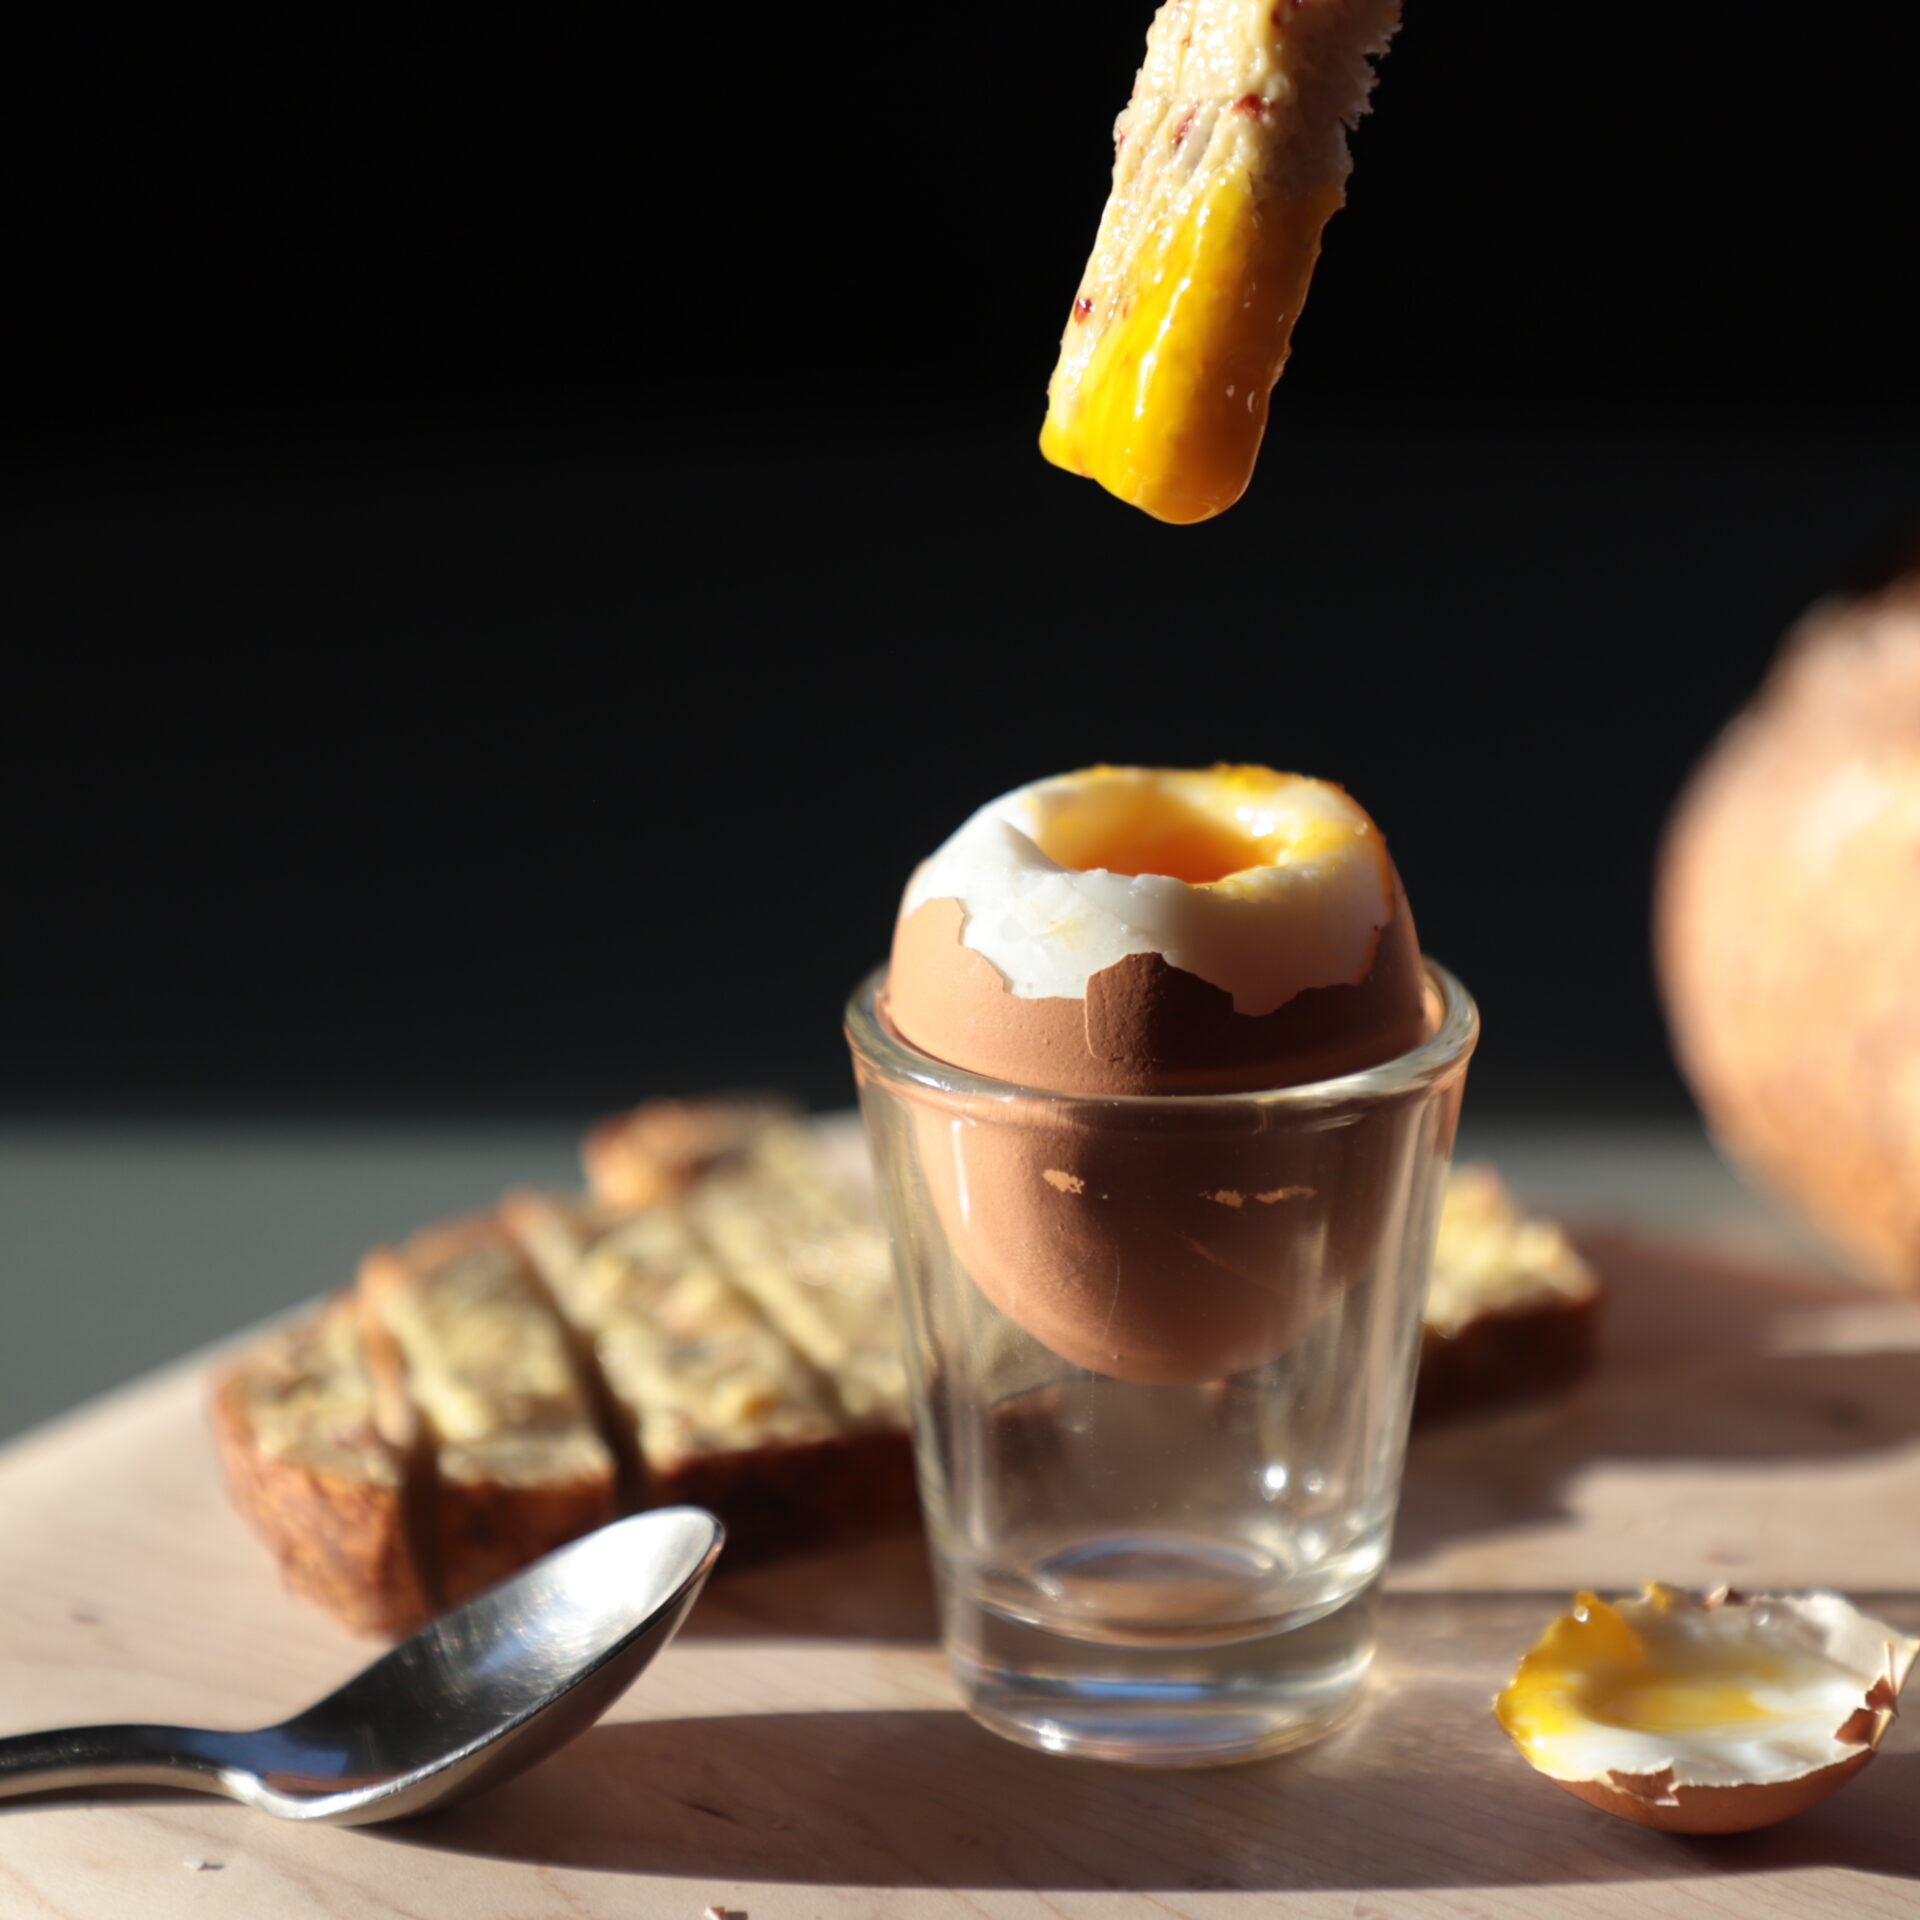 Side view of egg in shell nestled in a clear shot glass, next to a small metal spoon, a piece of buttered bread, and a piece of bread poised in the air exiting the top of the image has just been dipped in the yolk, sunlit from the side and on a black background.